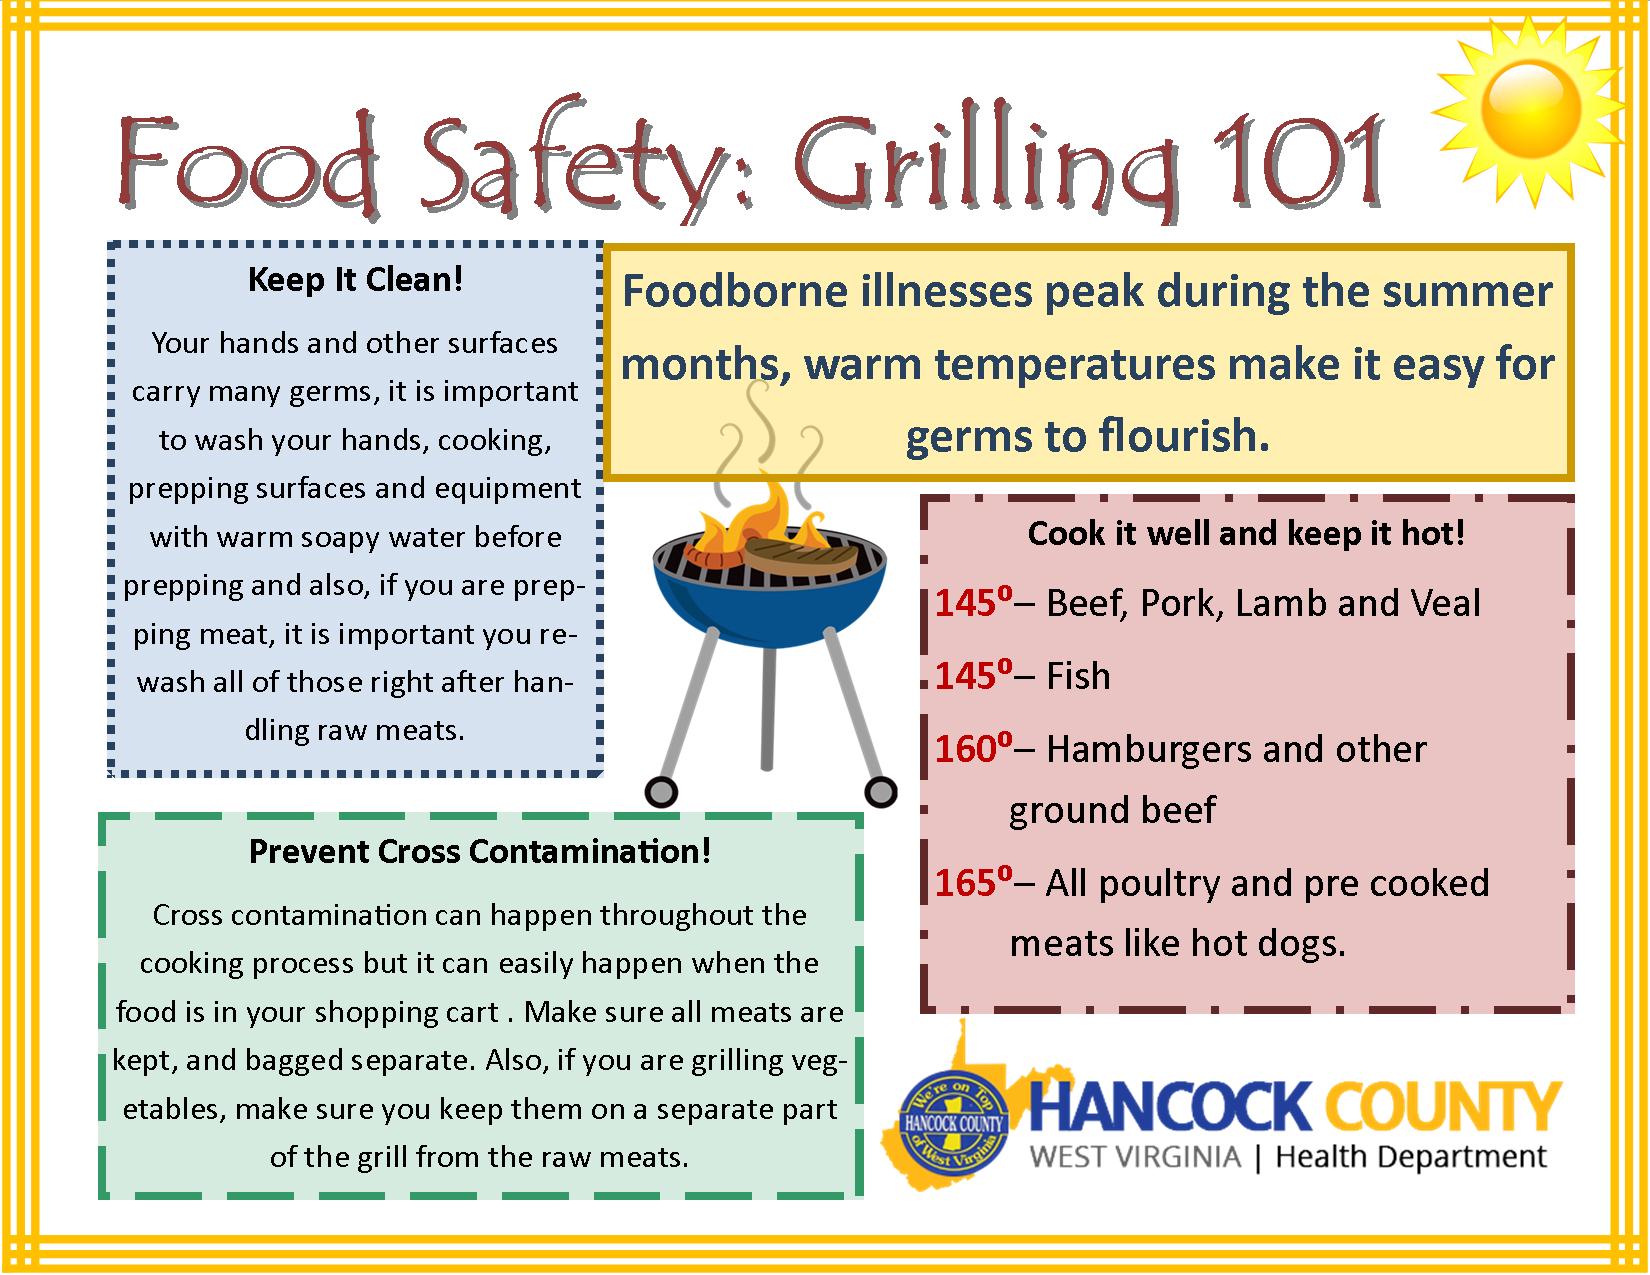 I. Introduction to Food Safety When Using a Grill